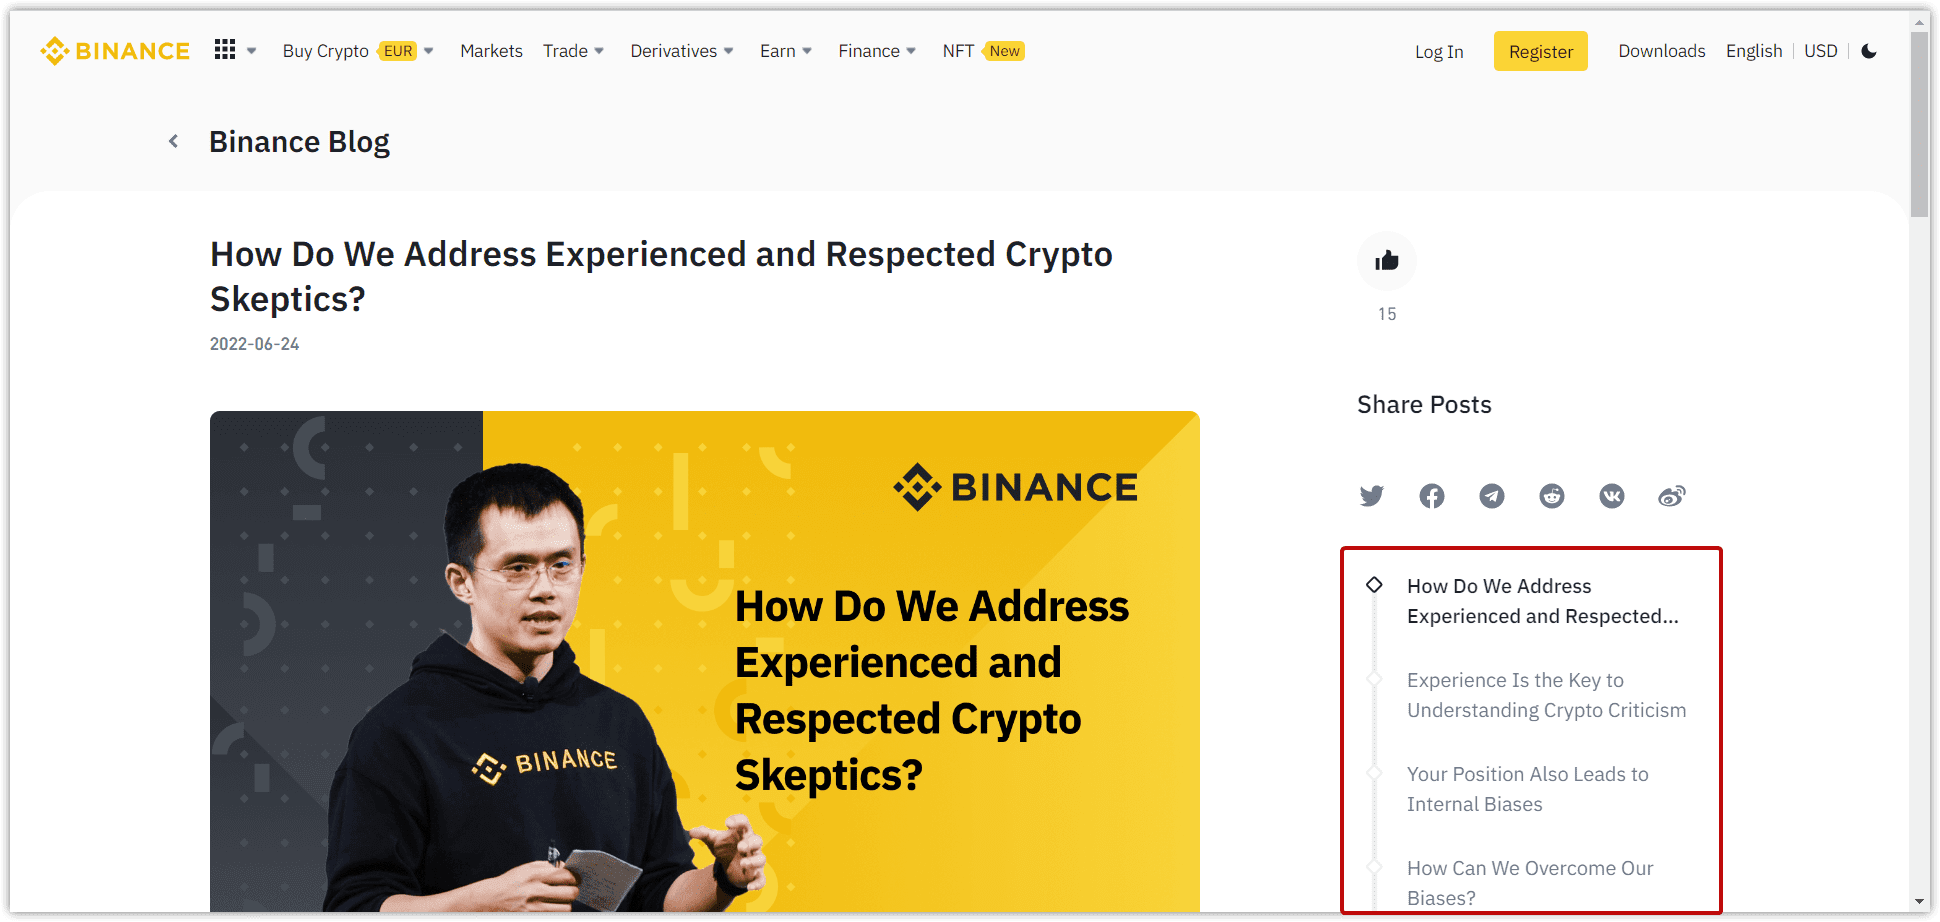 An example of an informative article structure from Binance